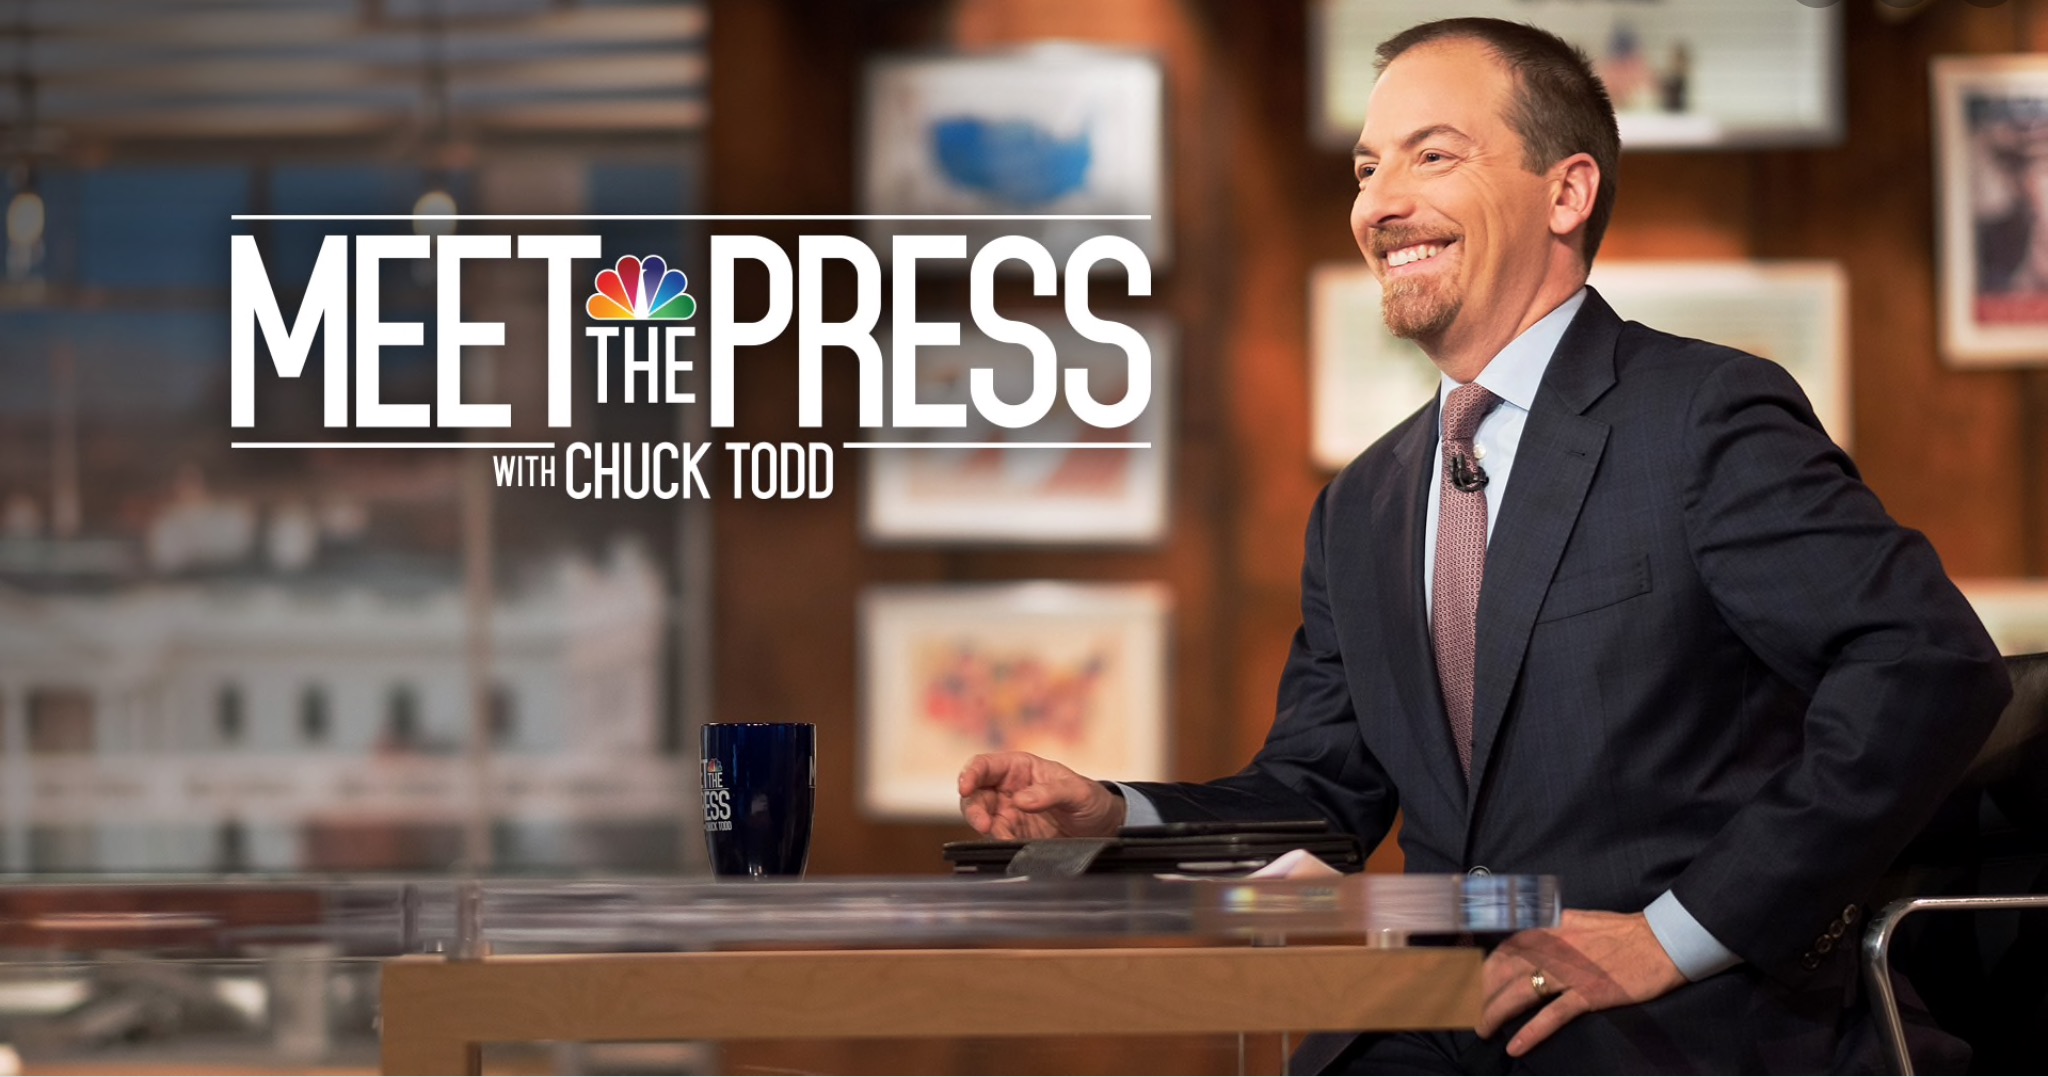 NBC NEWS MEET THE PRESS WITH CHUCK TODD FULL EPISODE FOR APRIL 19th 2020